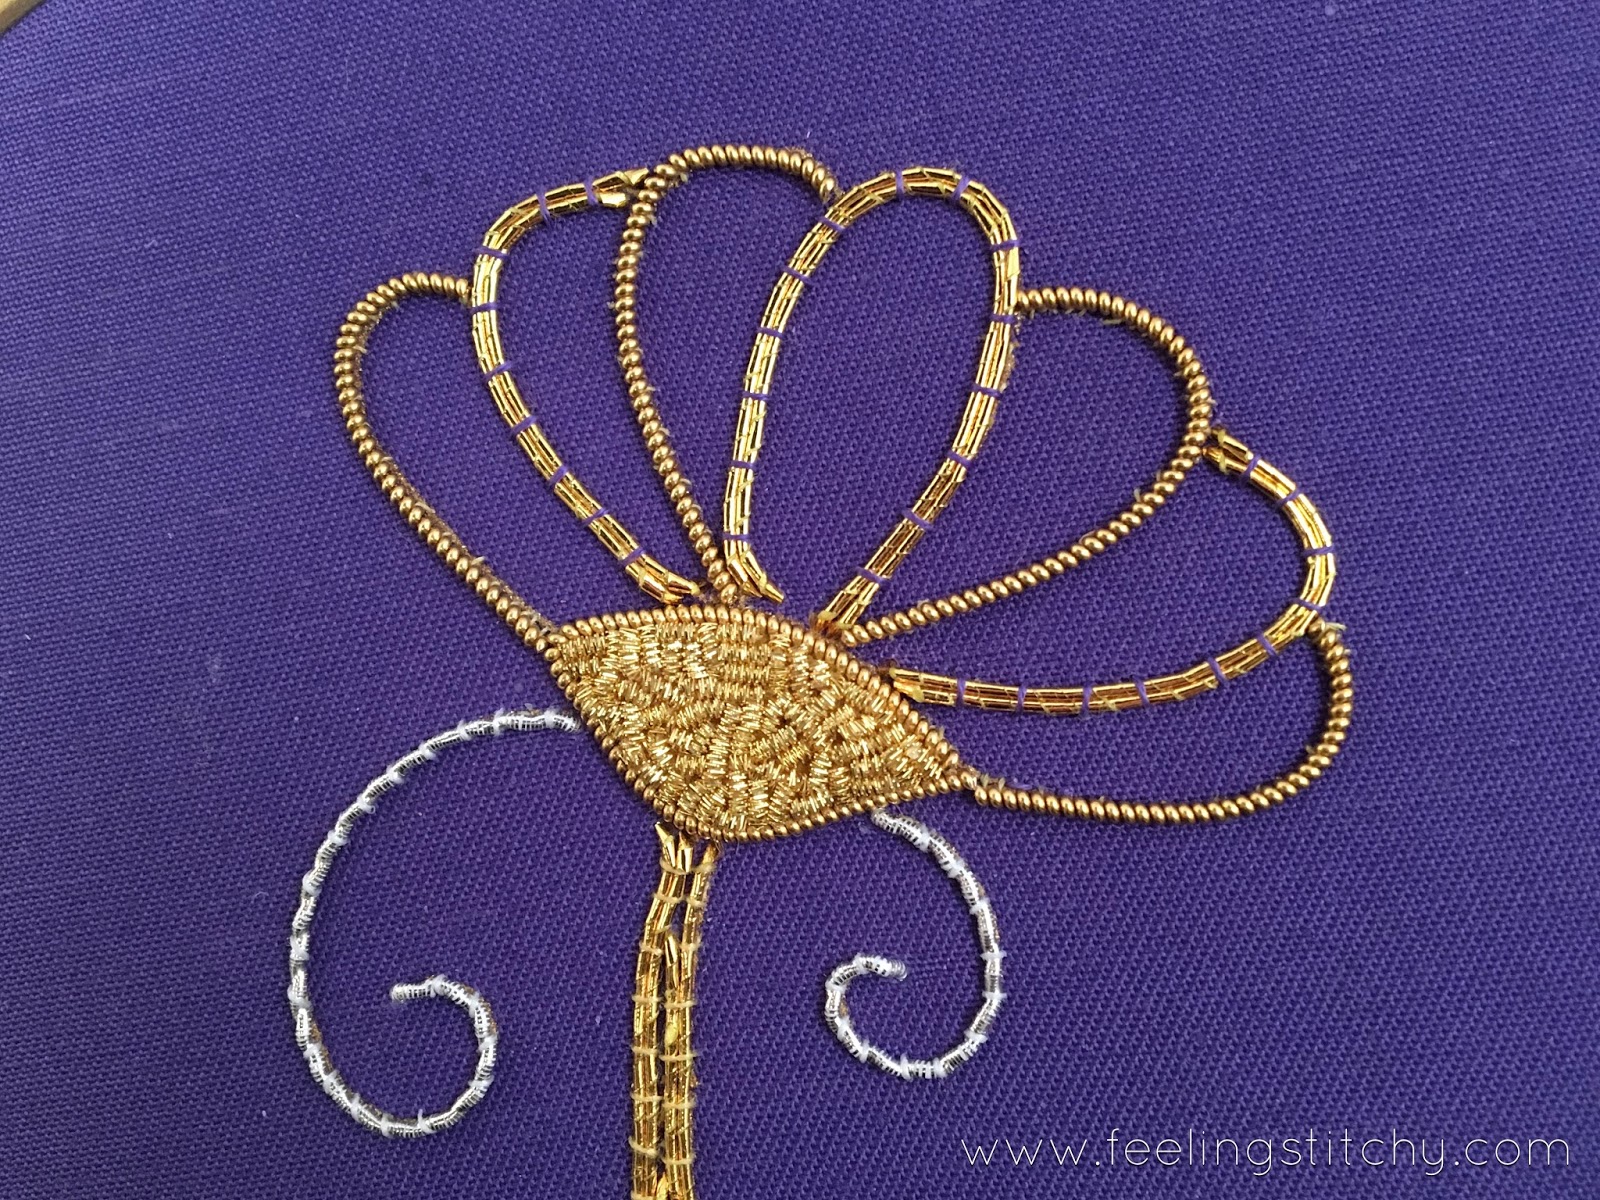 Goldwork Daisy Part 3 by Michelle for Feeling Stitchy